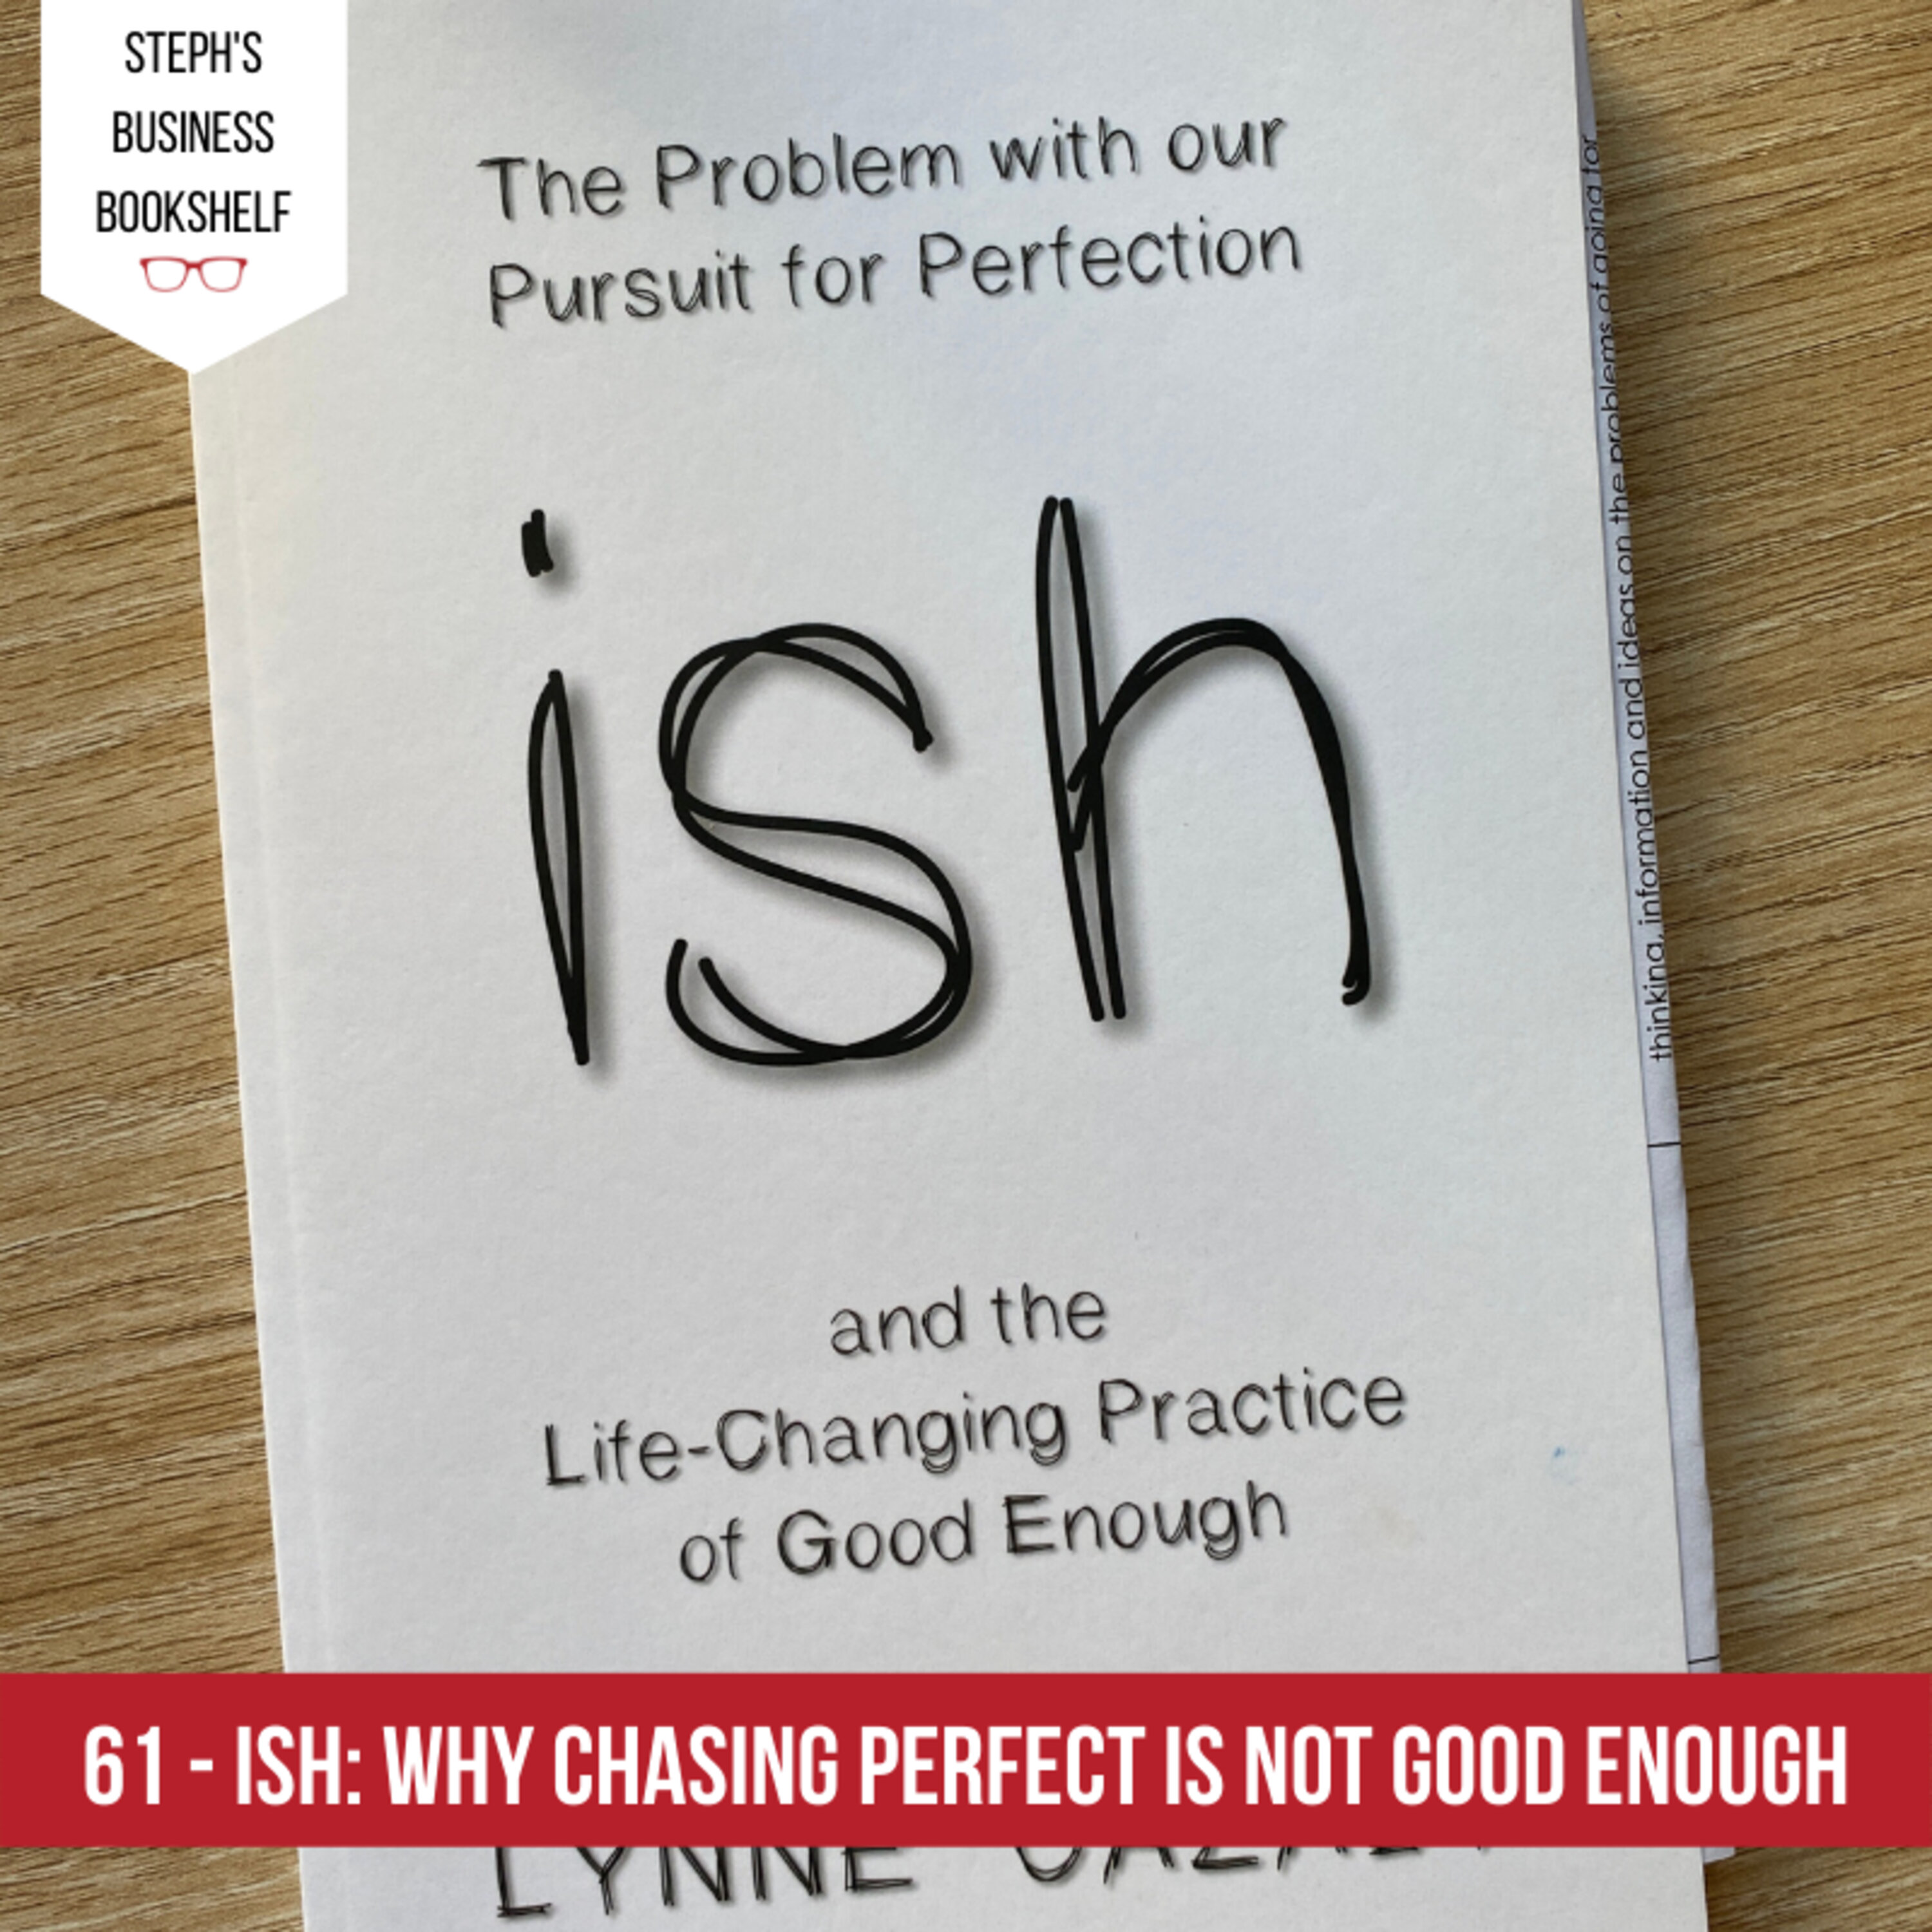 Ish by Lynne Cazaly: Why chasing perfect is not good enough